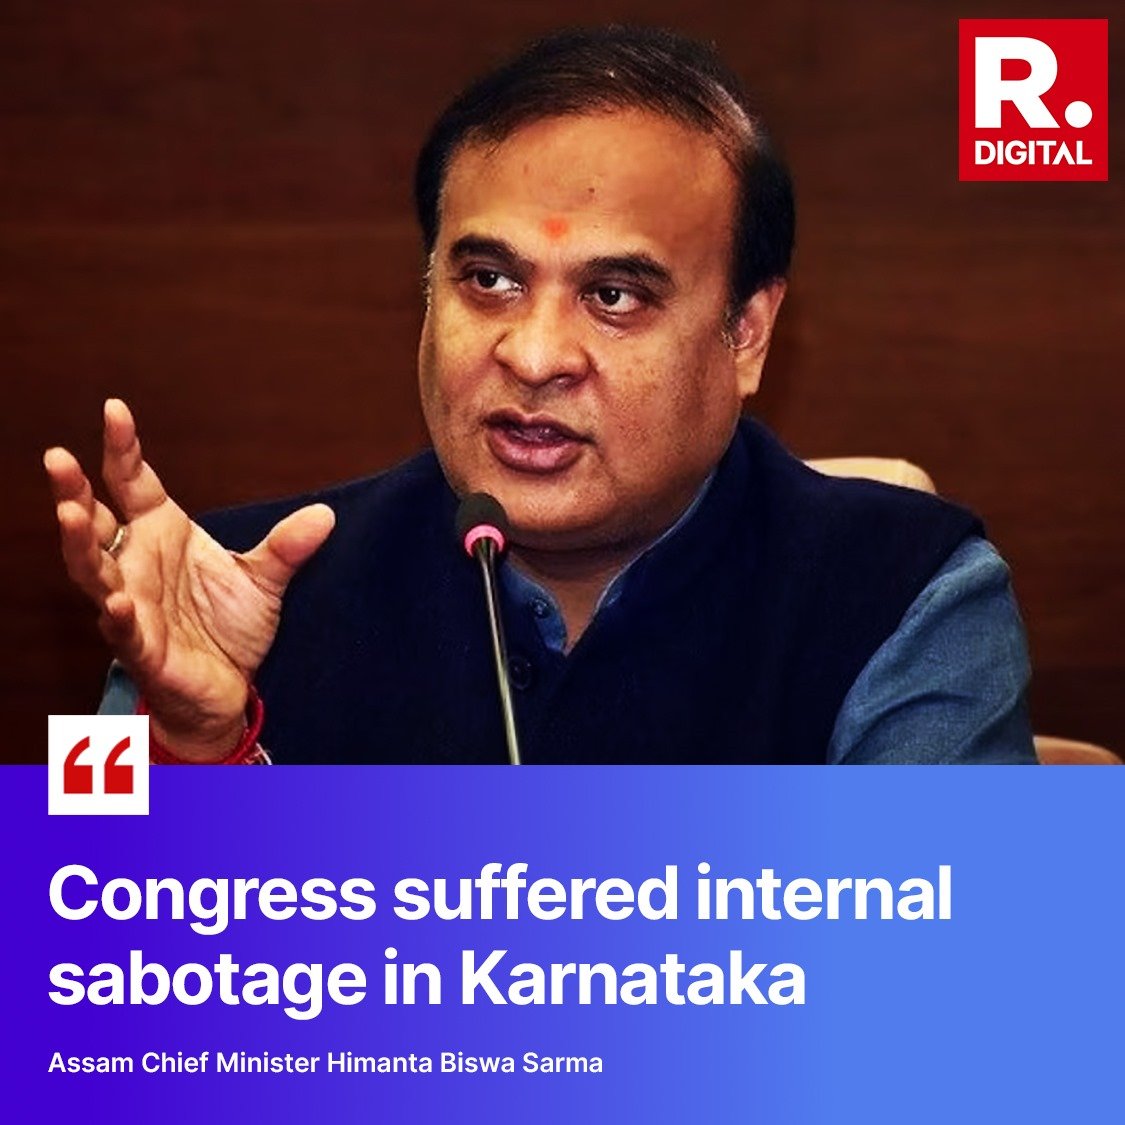 #HimantaAndArnab | I believe that either Siddaramaiah or DK Shivakumar has sabotaged the elections. Otherwise, why will they talk about Muslim reservations at a time when people in Karnataka are angry with Neha Hiremath's murder and the cafe blast: Assam CM Himanta Biswa Sarma…